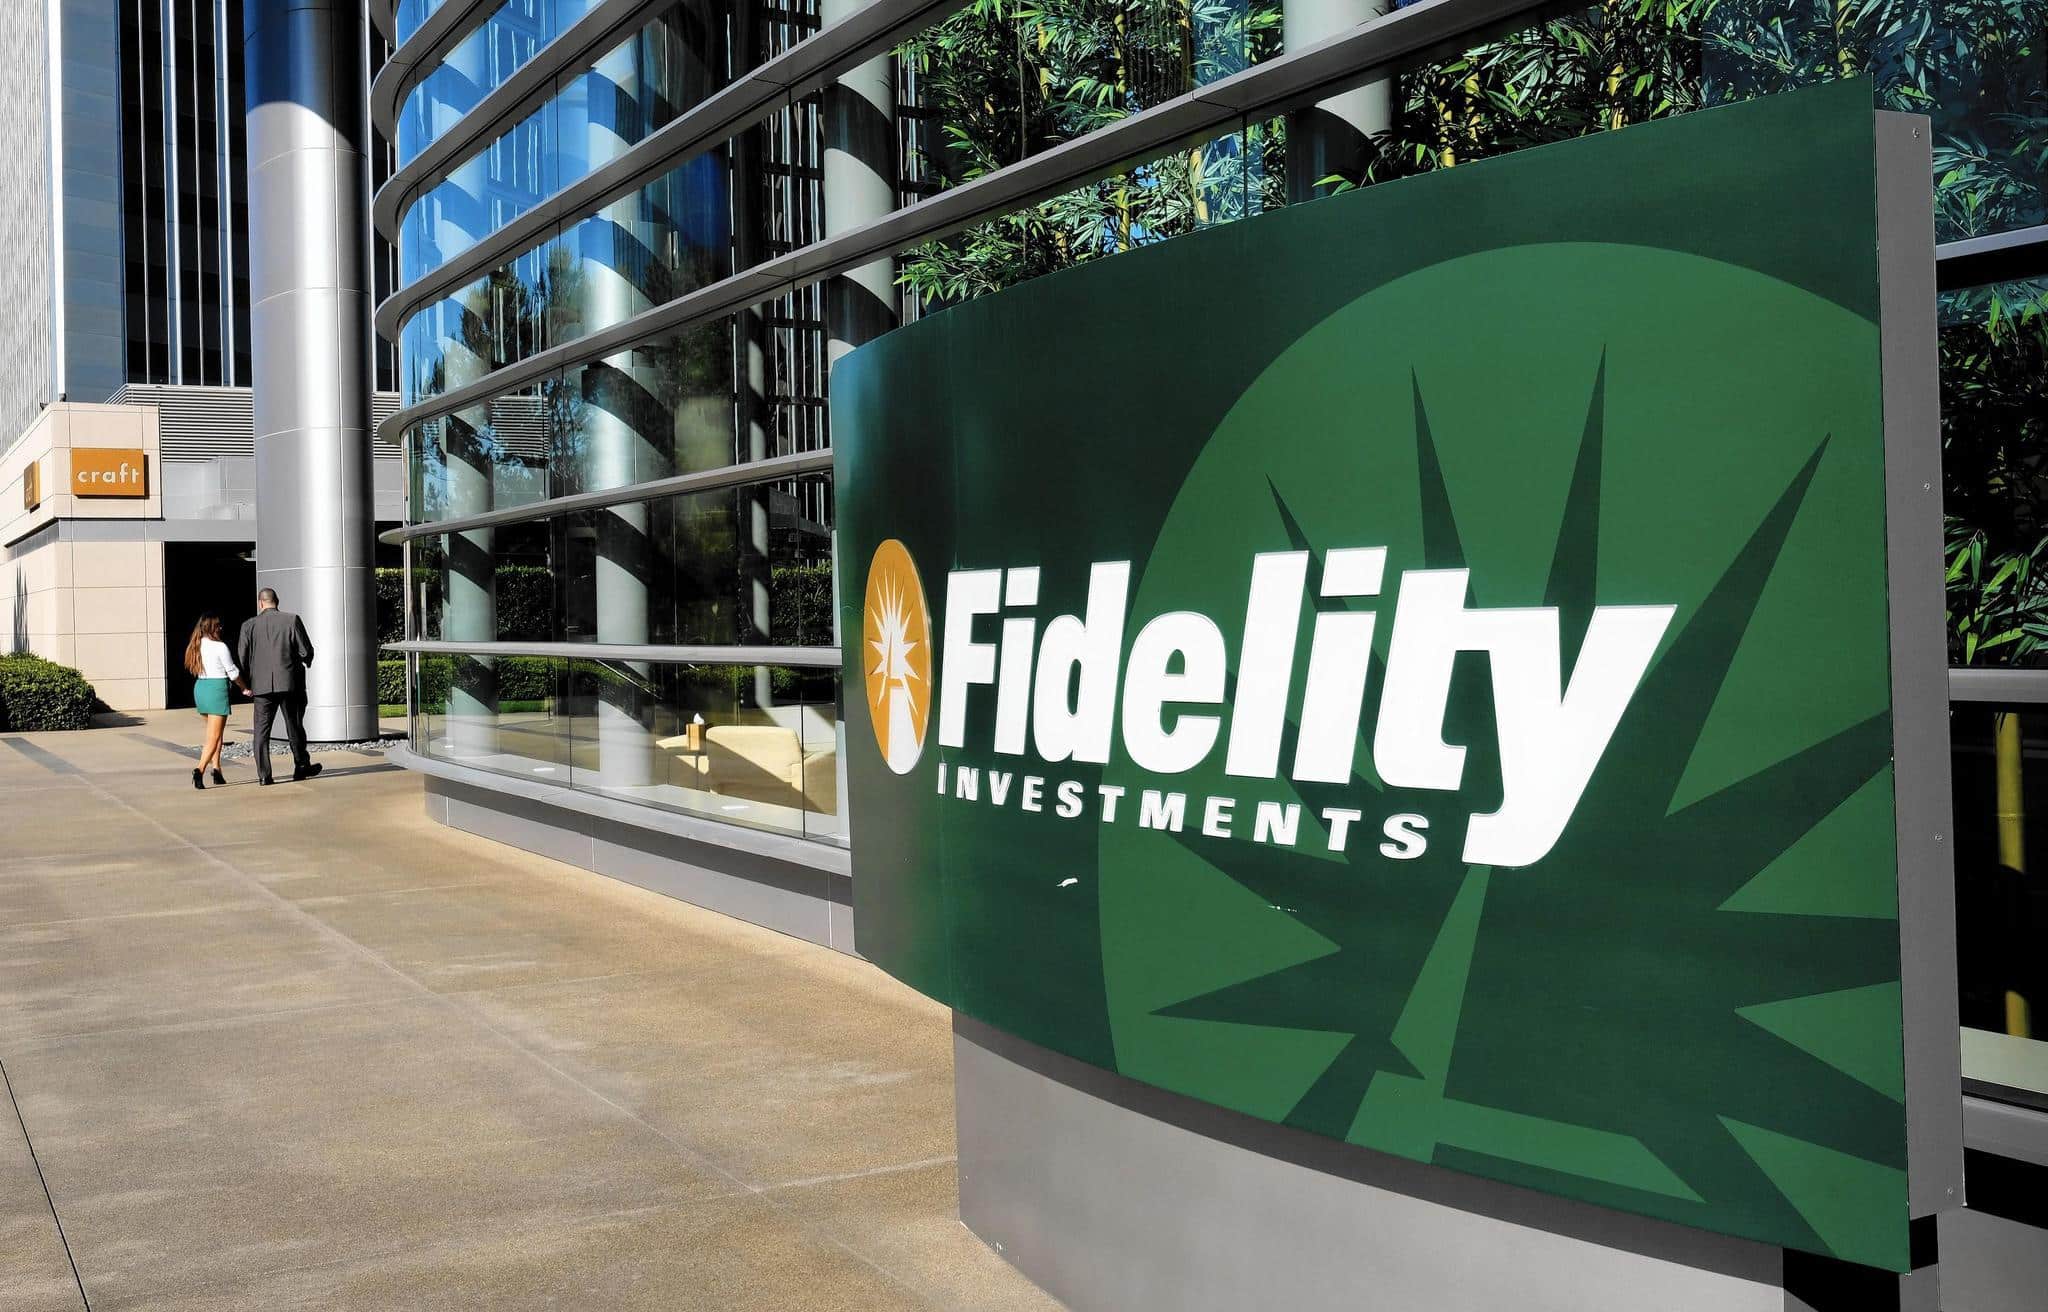 Fidelity, Managing $5 Trillion, Publishes Report on the Future of Ethereum